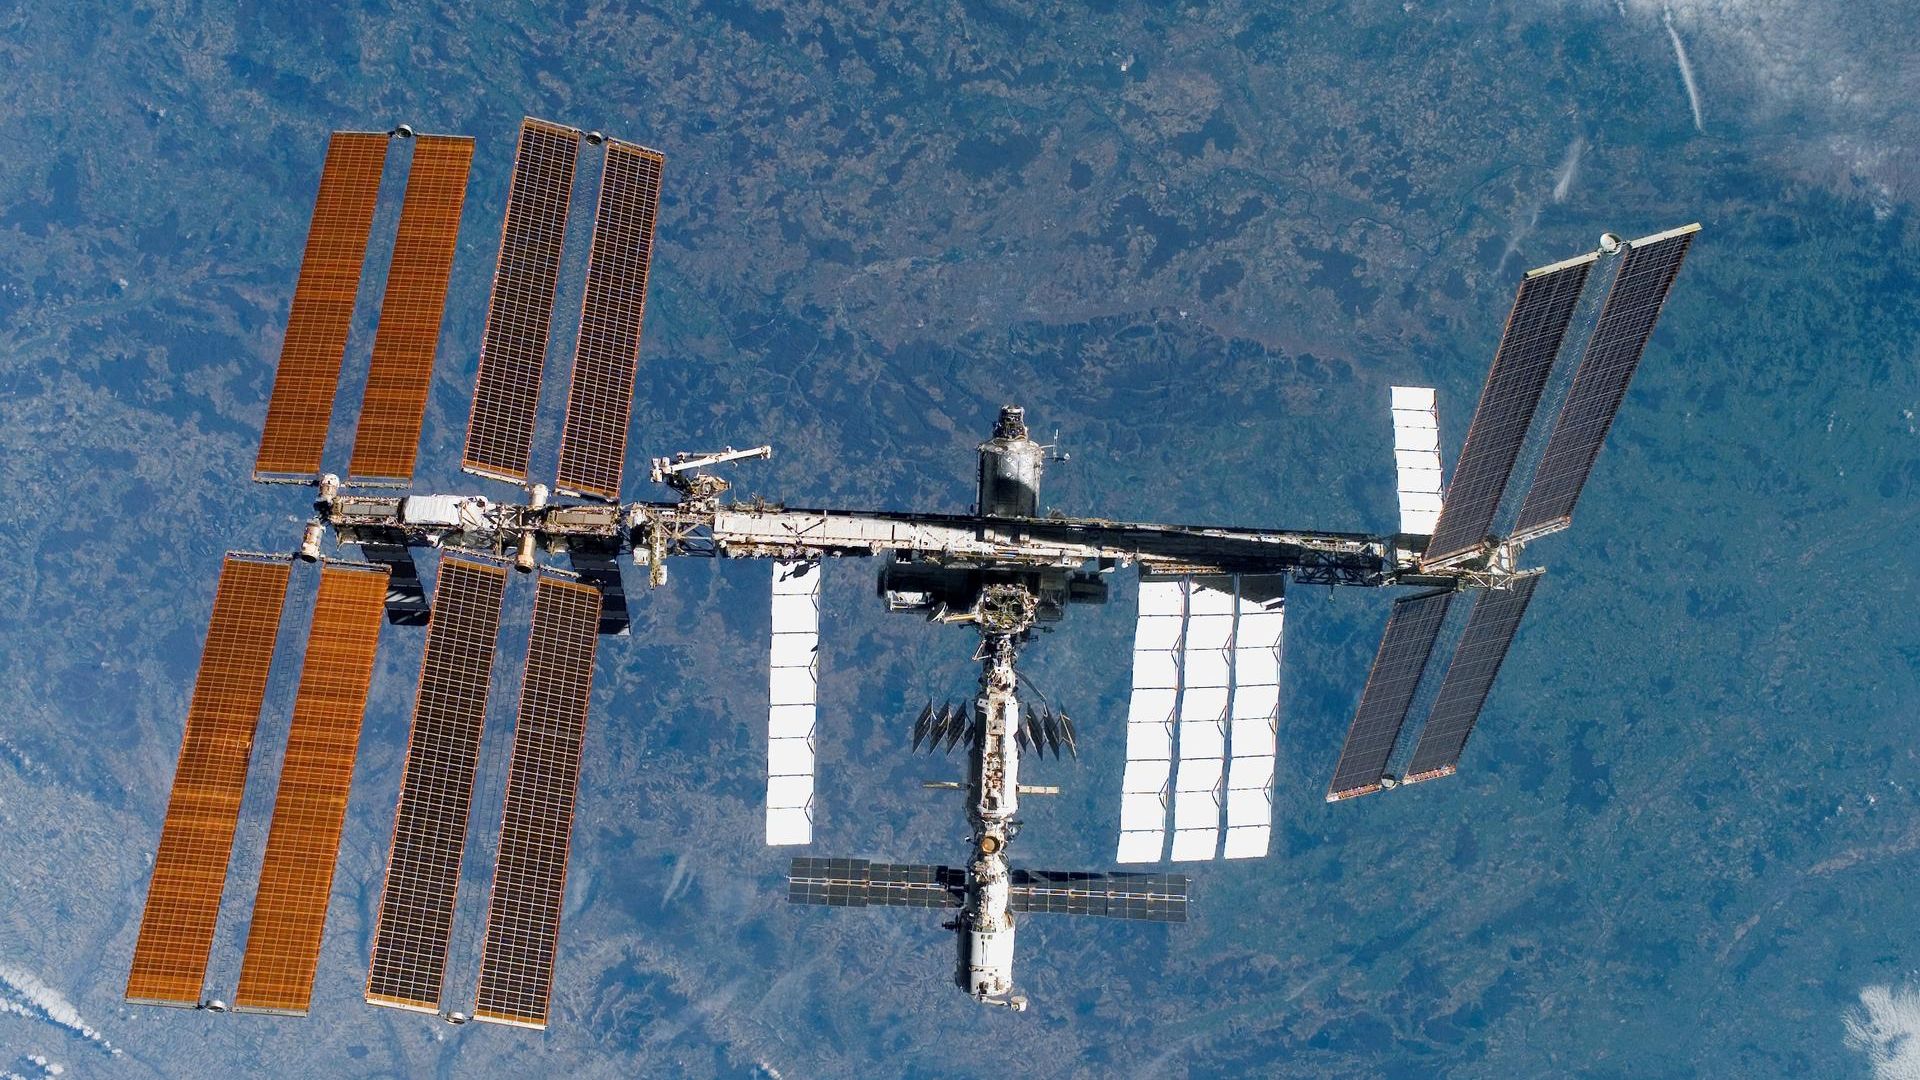 The International Space Station seen above Earth